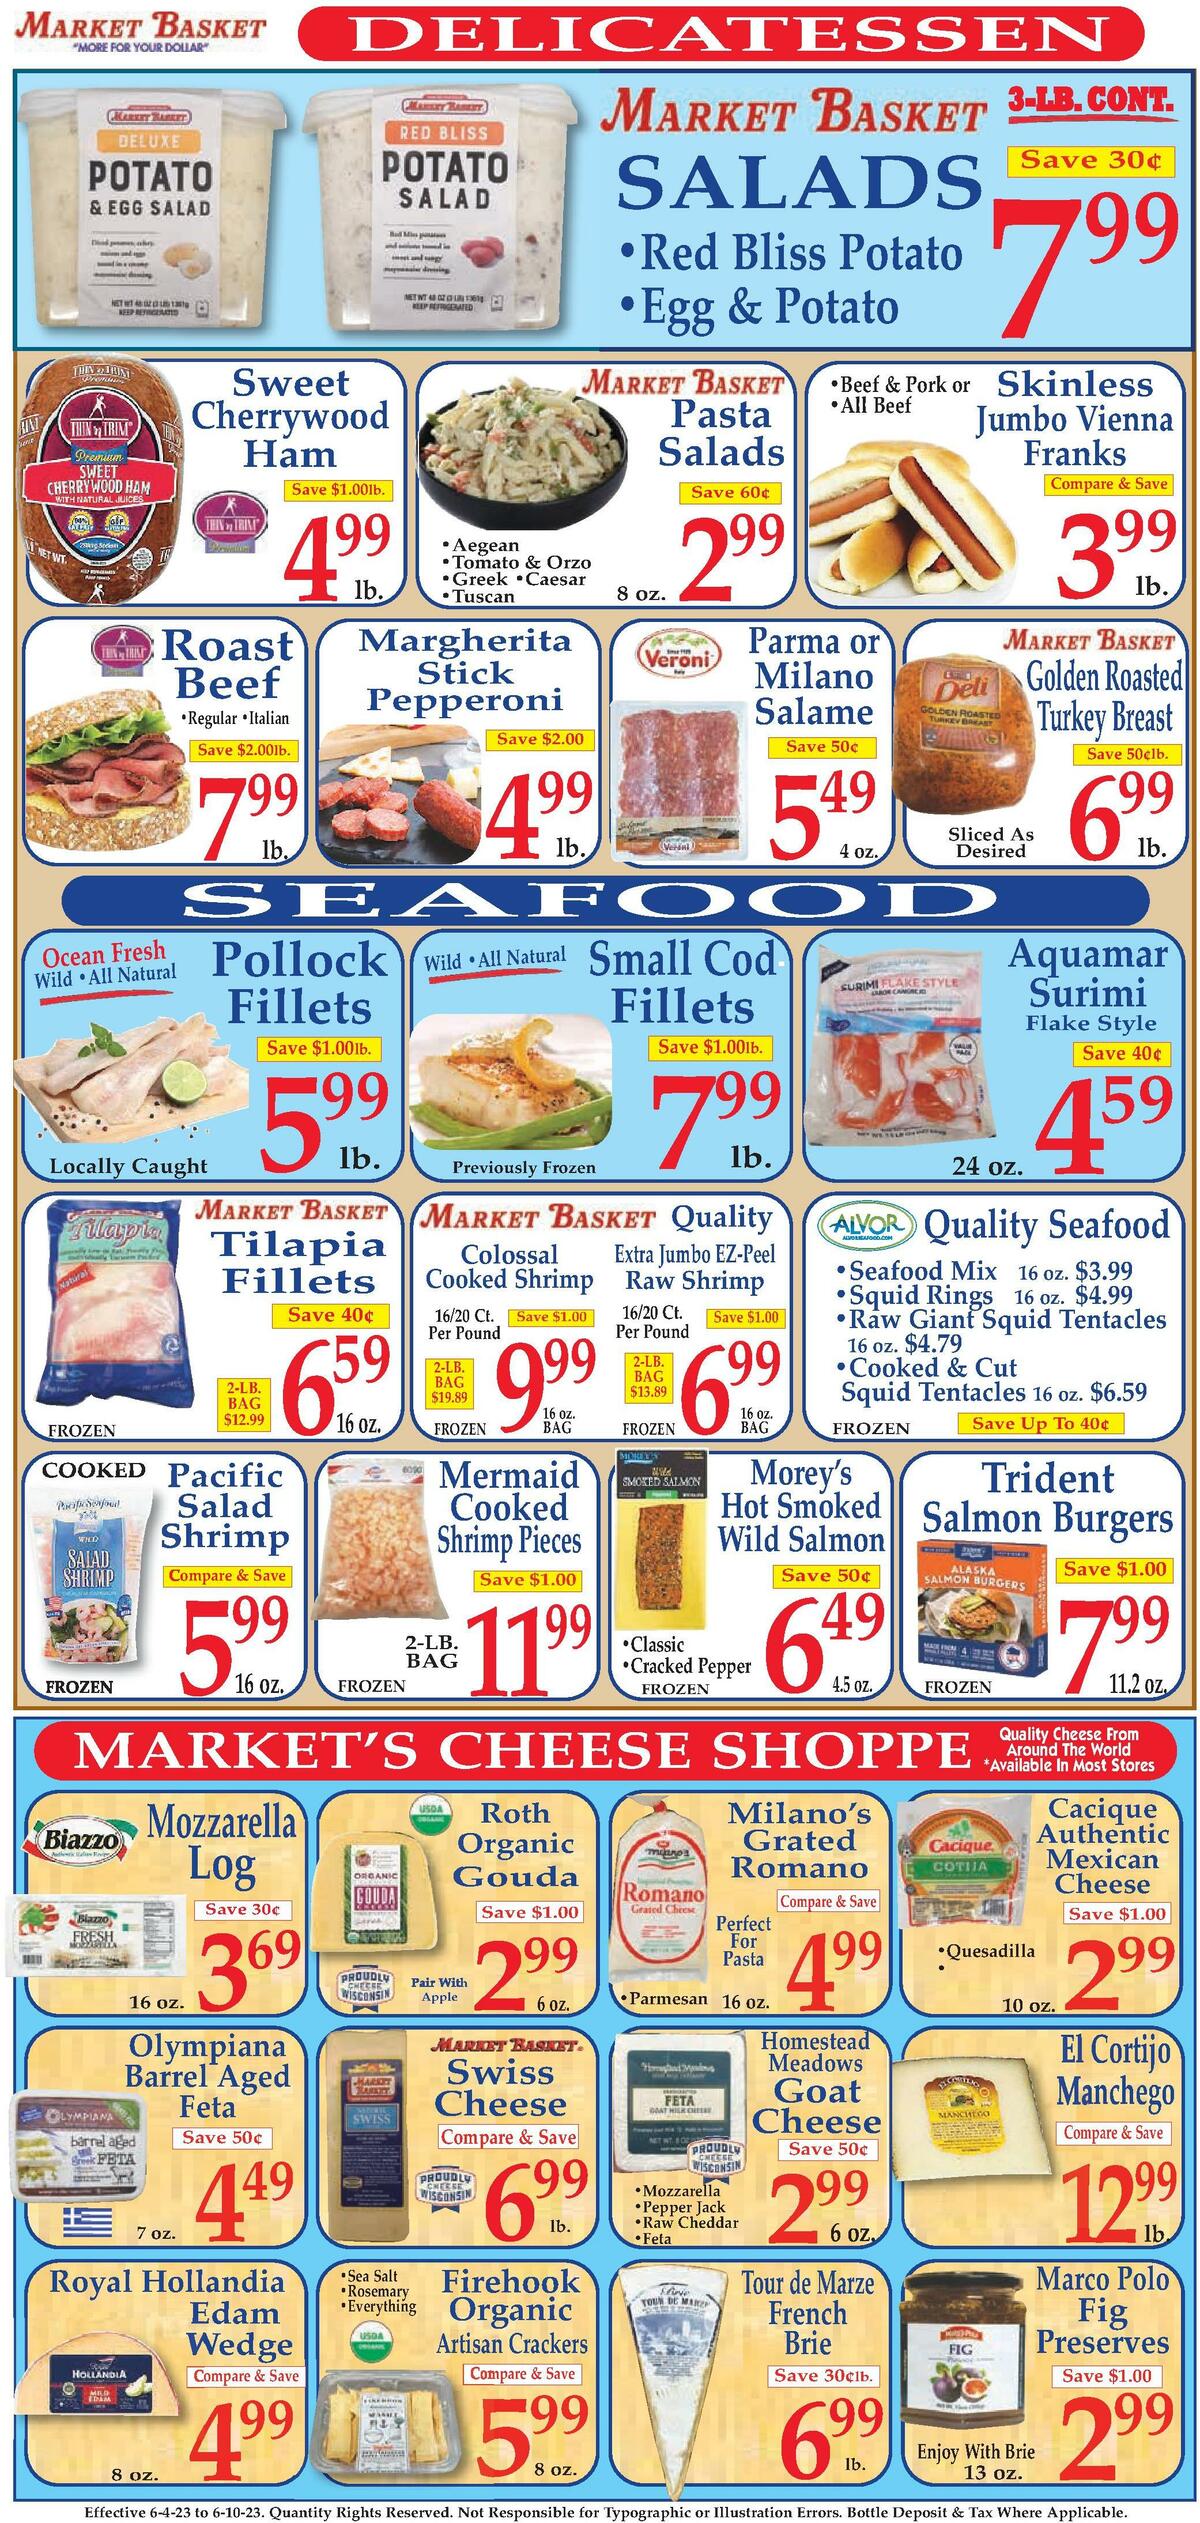 Market Basket Weekly Ad from June 4